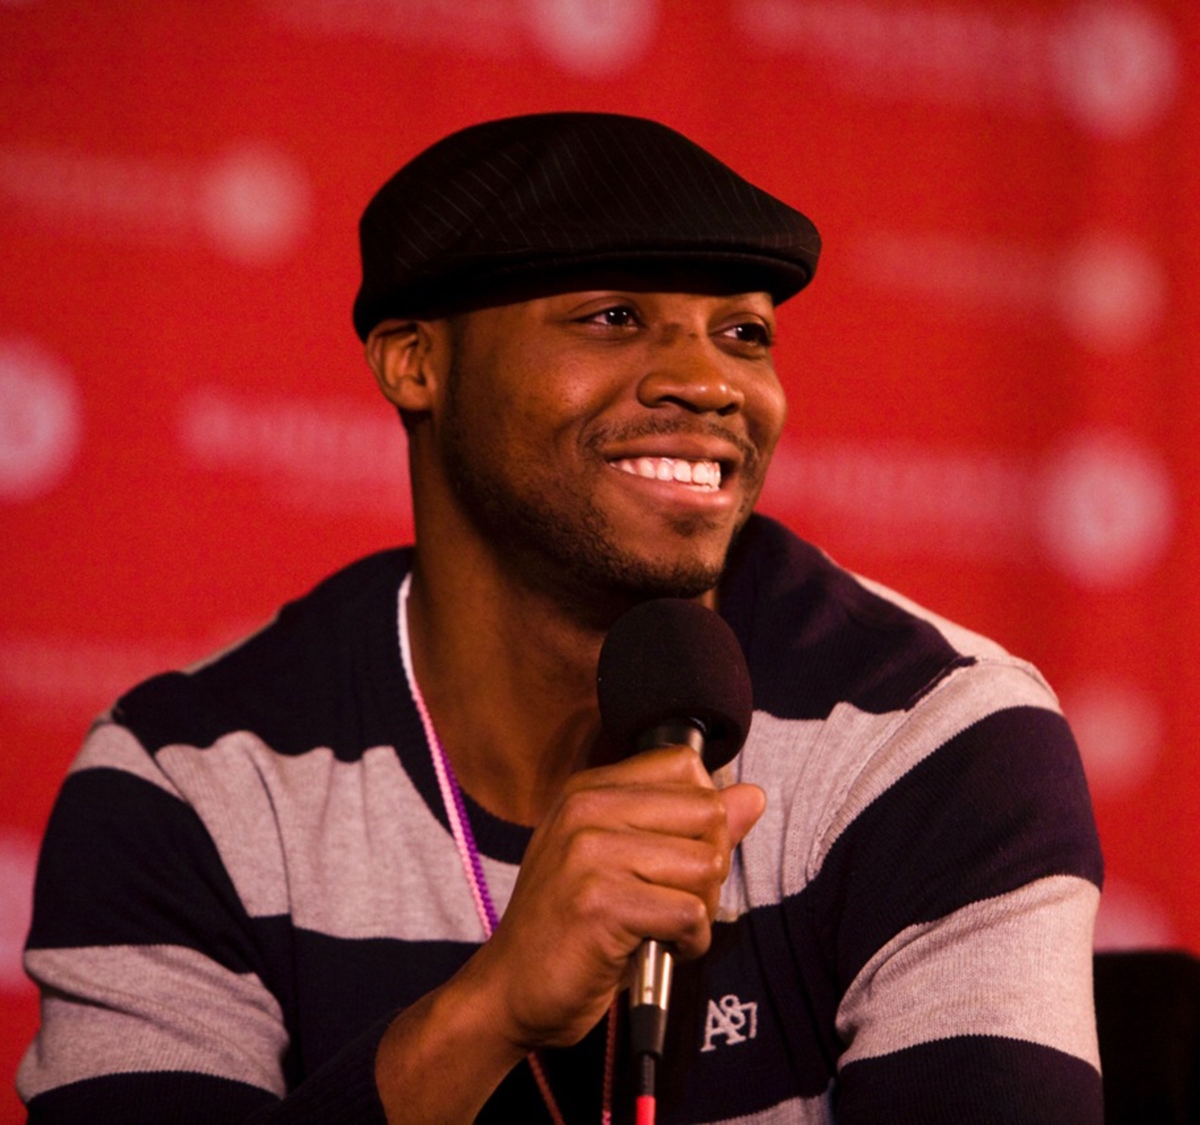 Headshot of an adult African American male wearing a striped sweater and a Kangol hat, holding a microphone in front of red background.